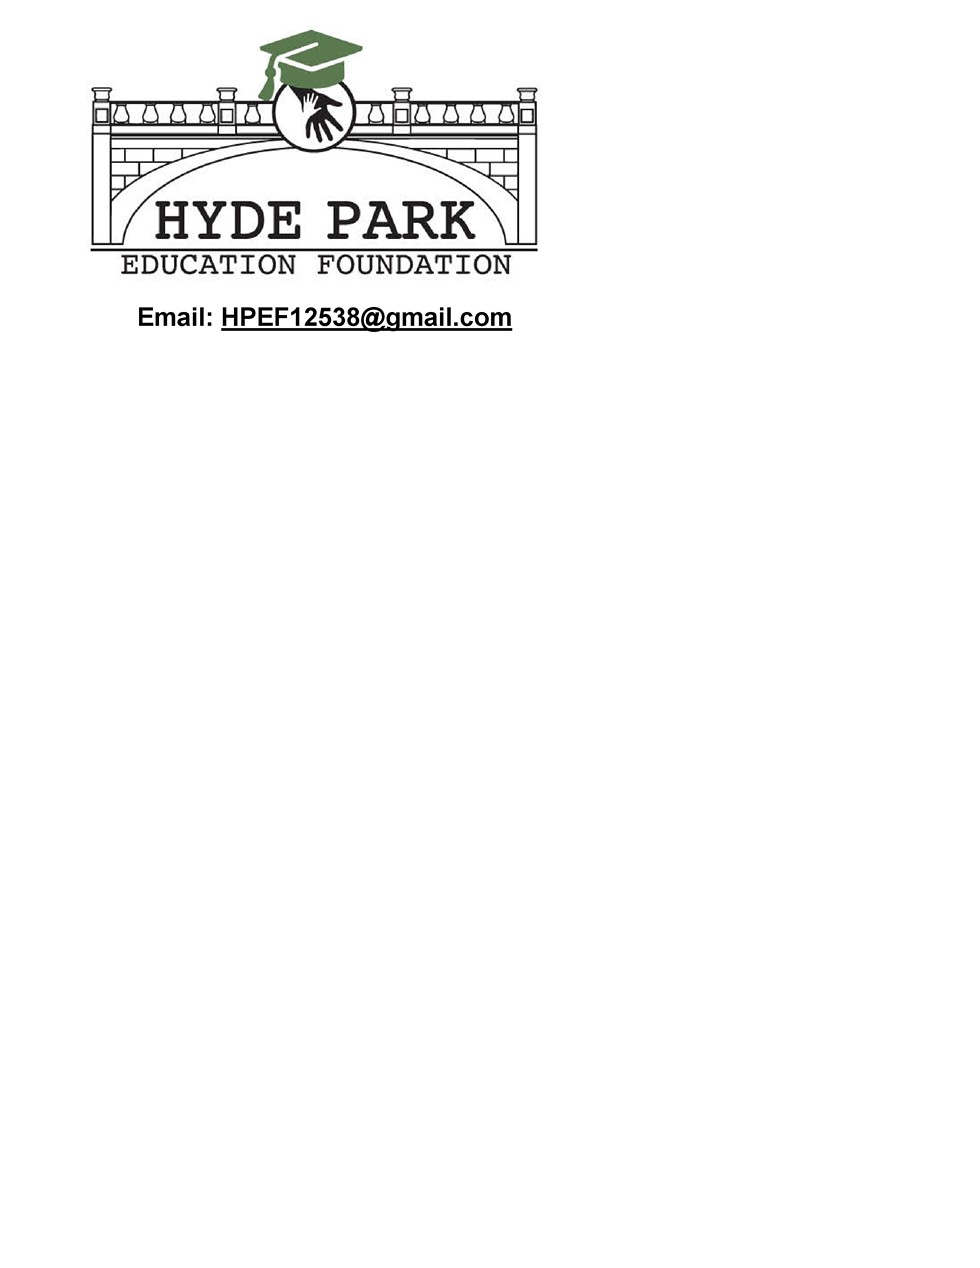 Event sponsored by the Hyde Park Education Foundation